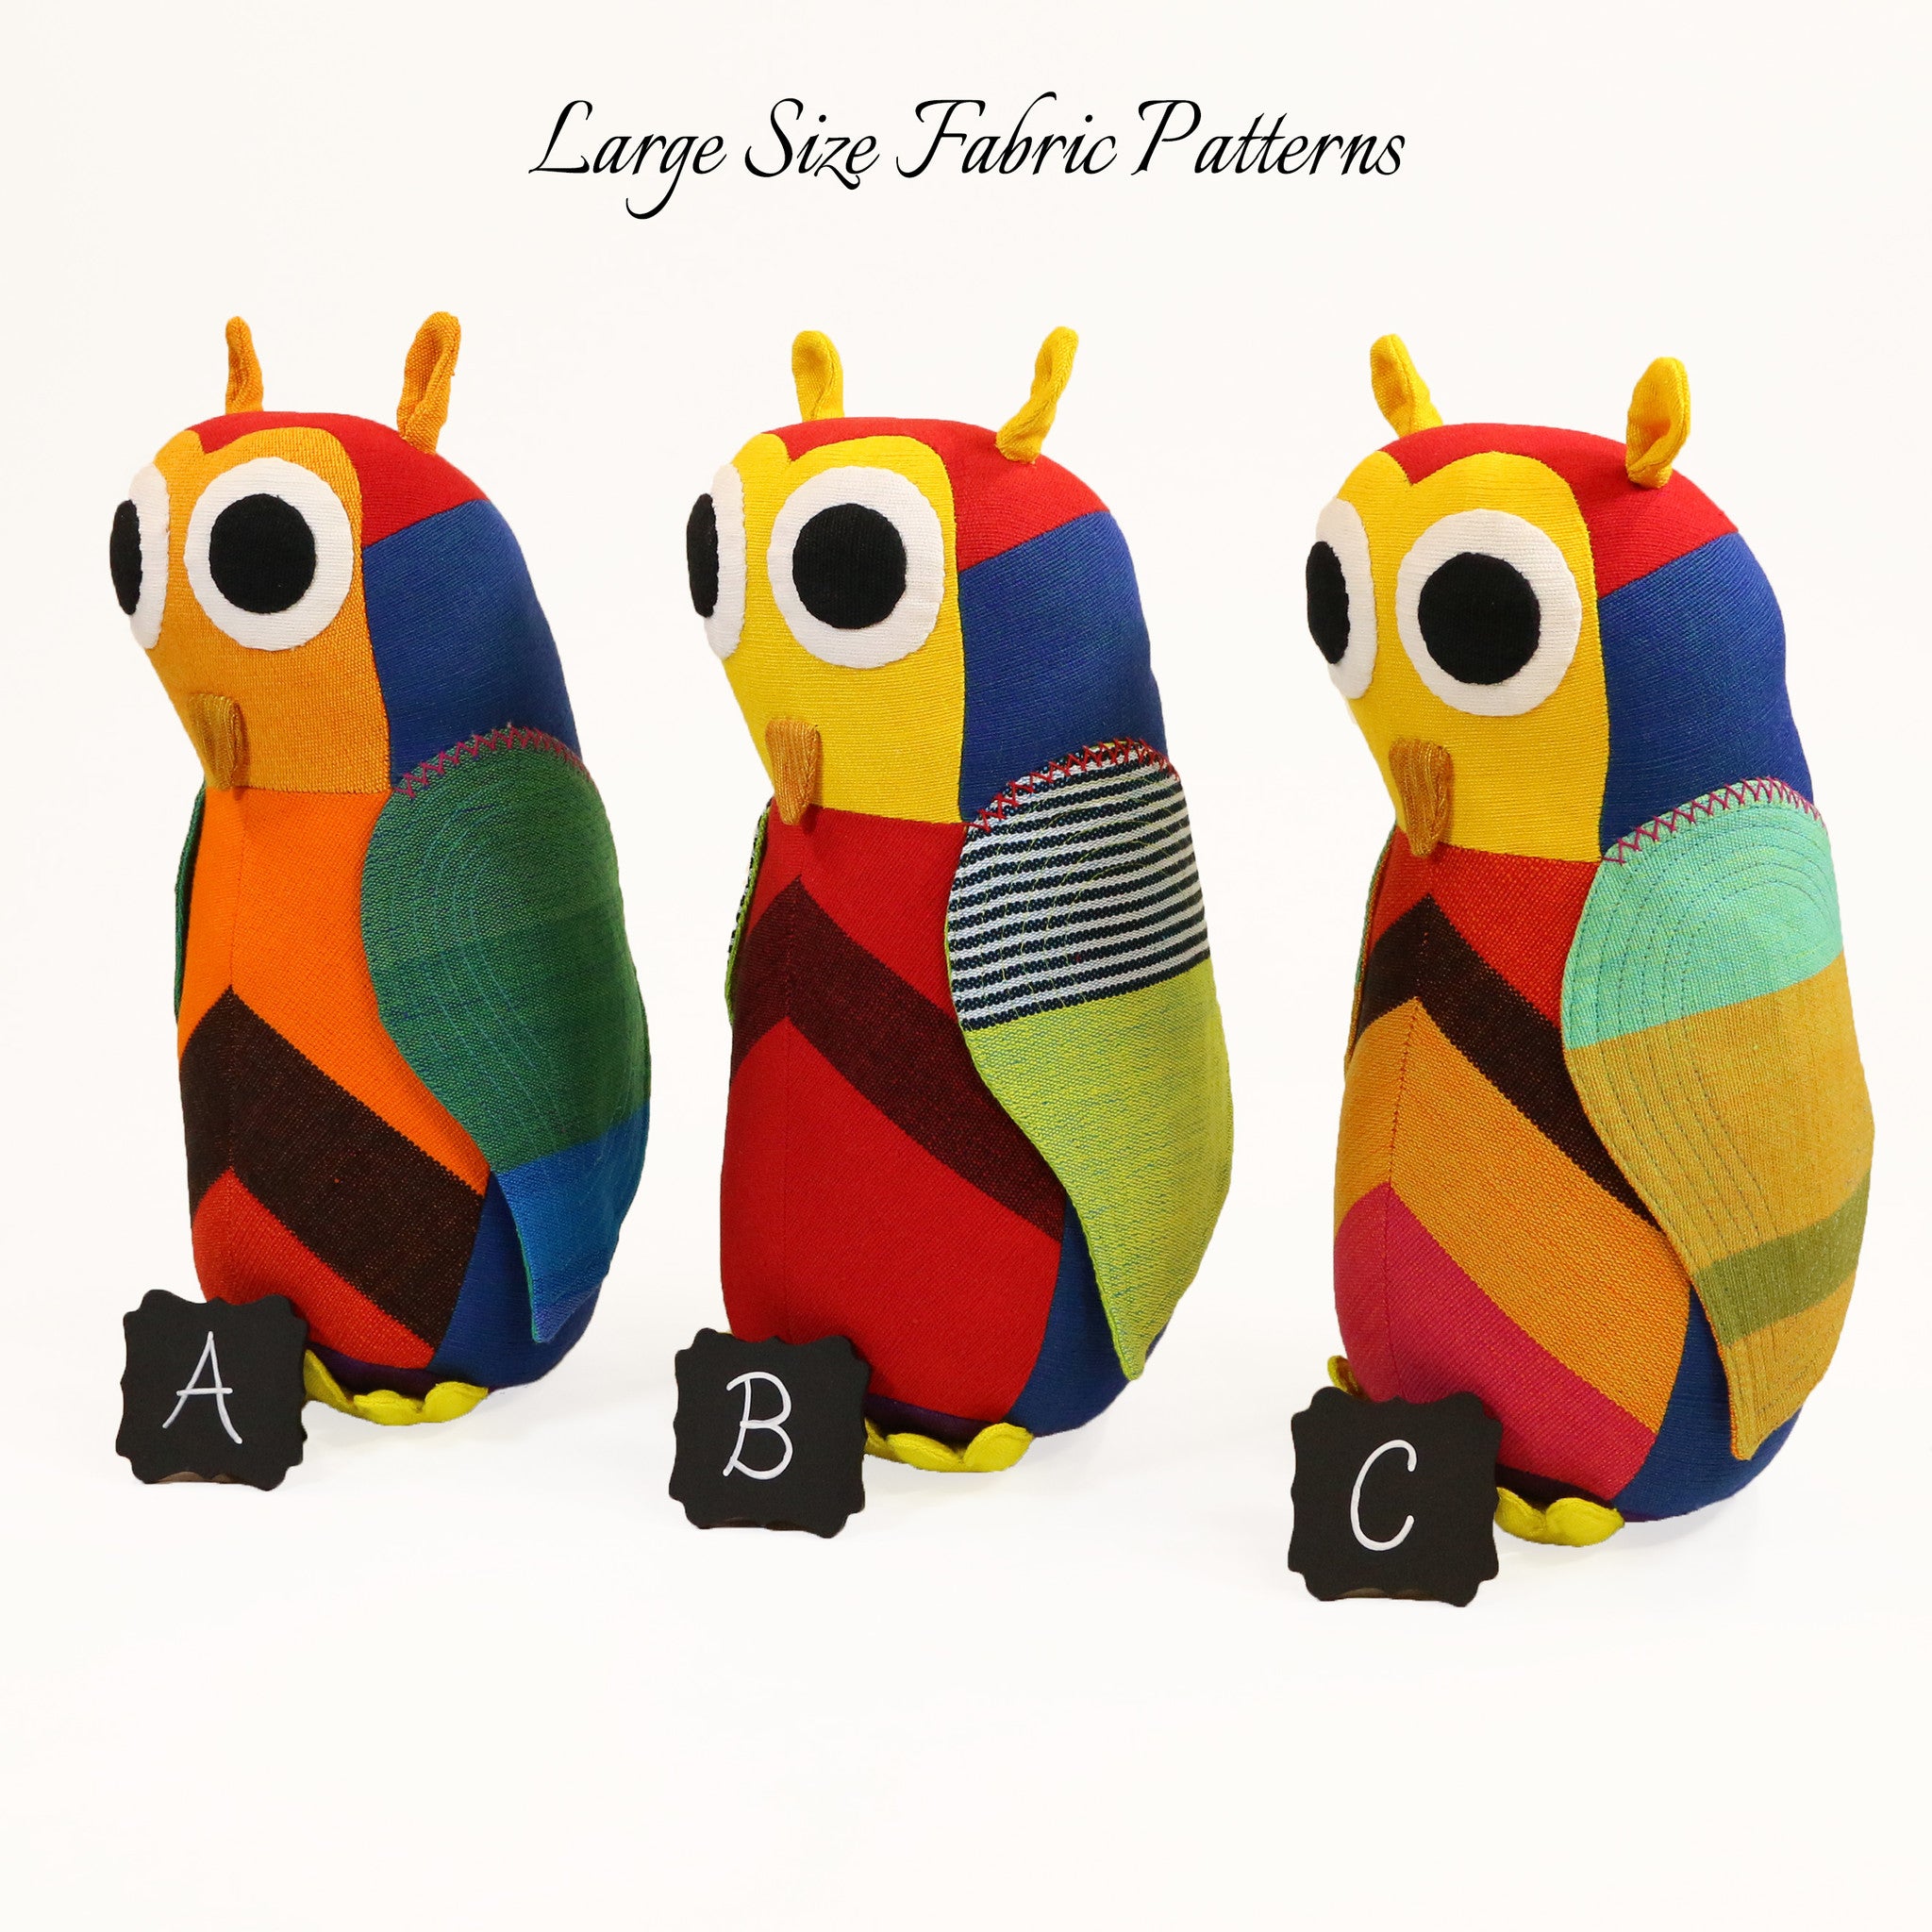 Hartley, the Owl – all large size fabric patterns shown